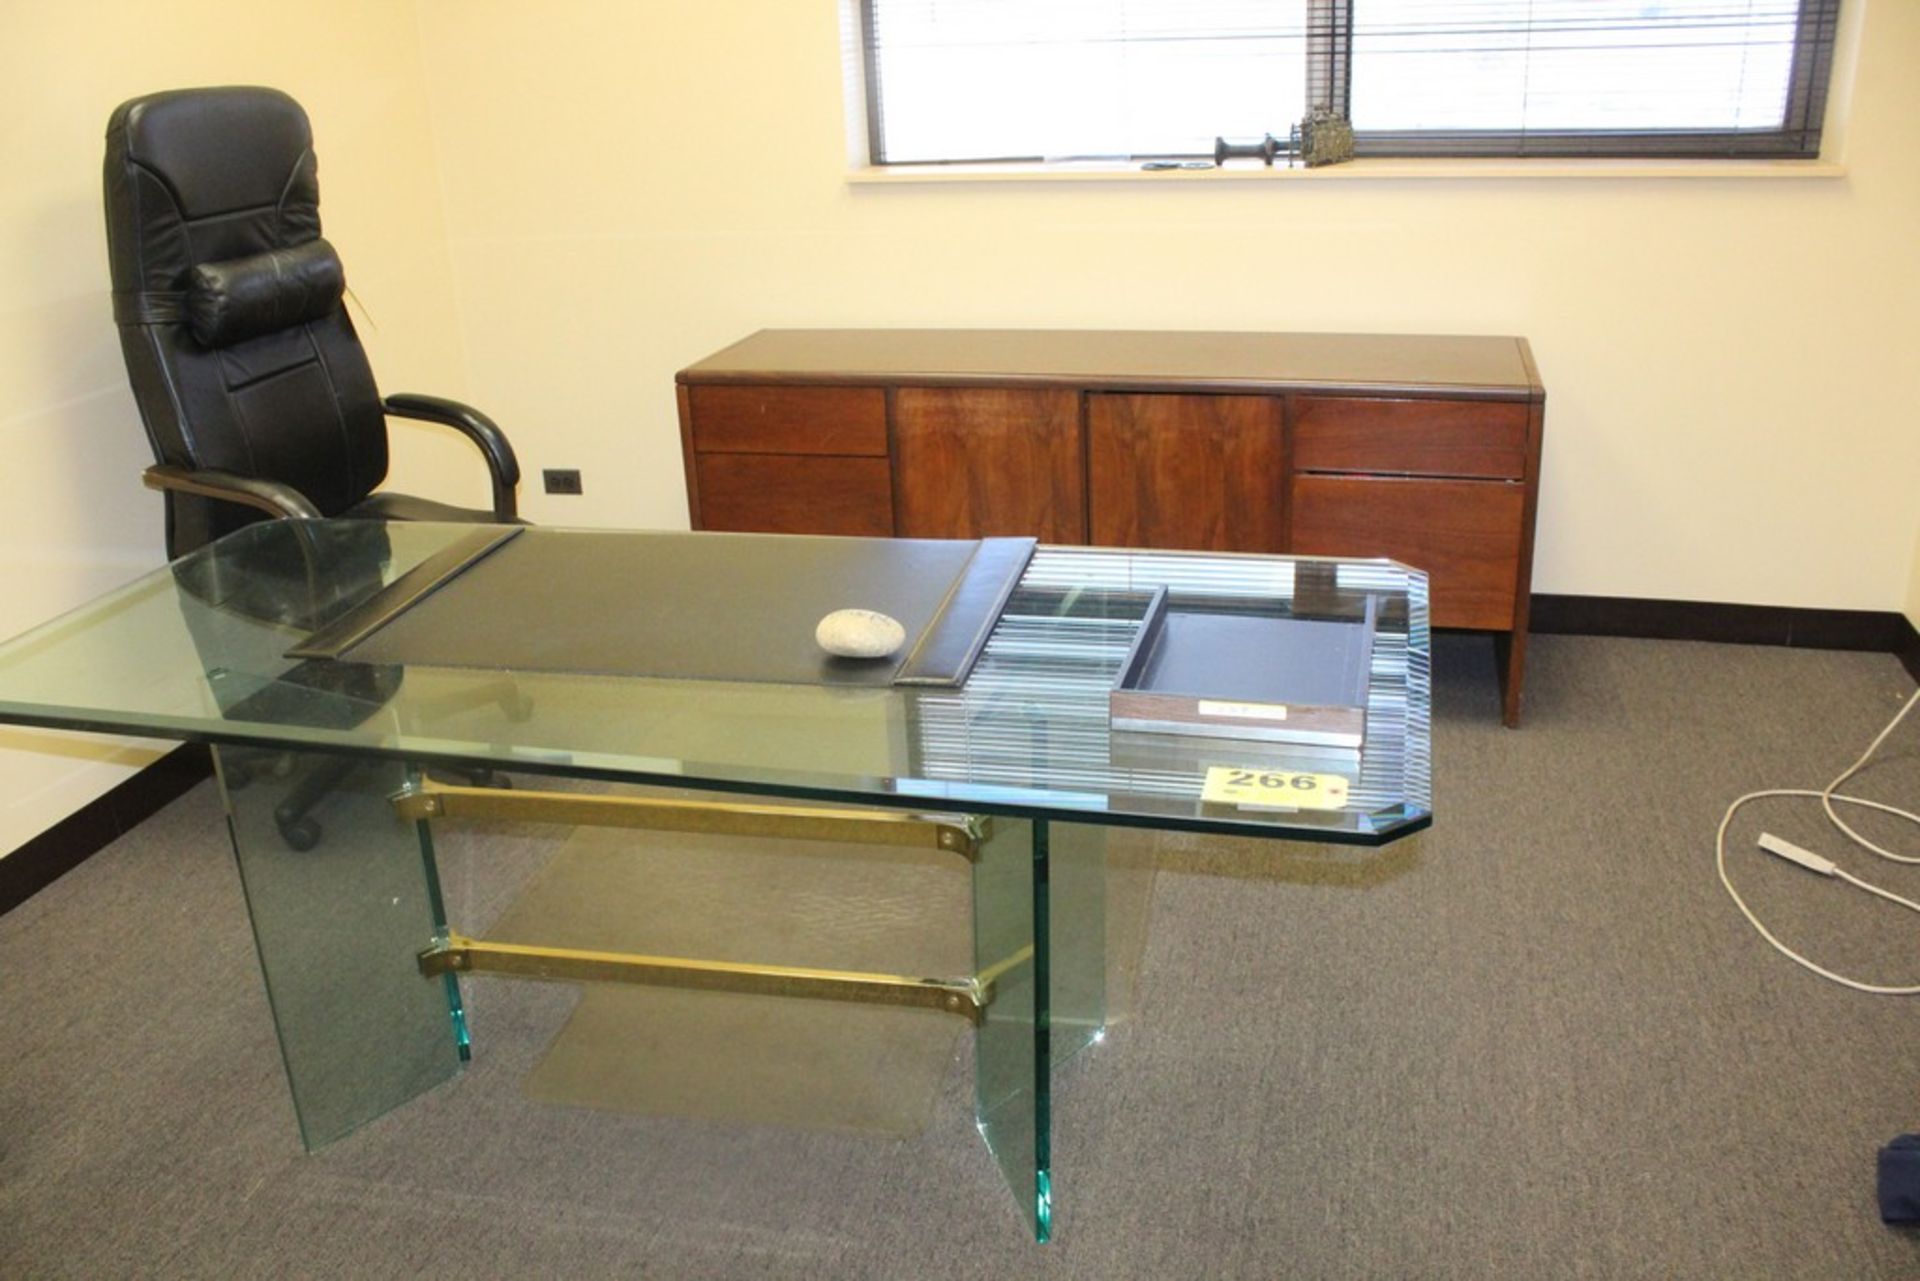 GLASS EXECUTIVE DESK - 72" X 30" X 29" AND WOOD CREDENZA - 29" X 72" X 20"